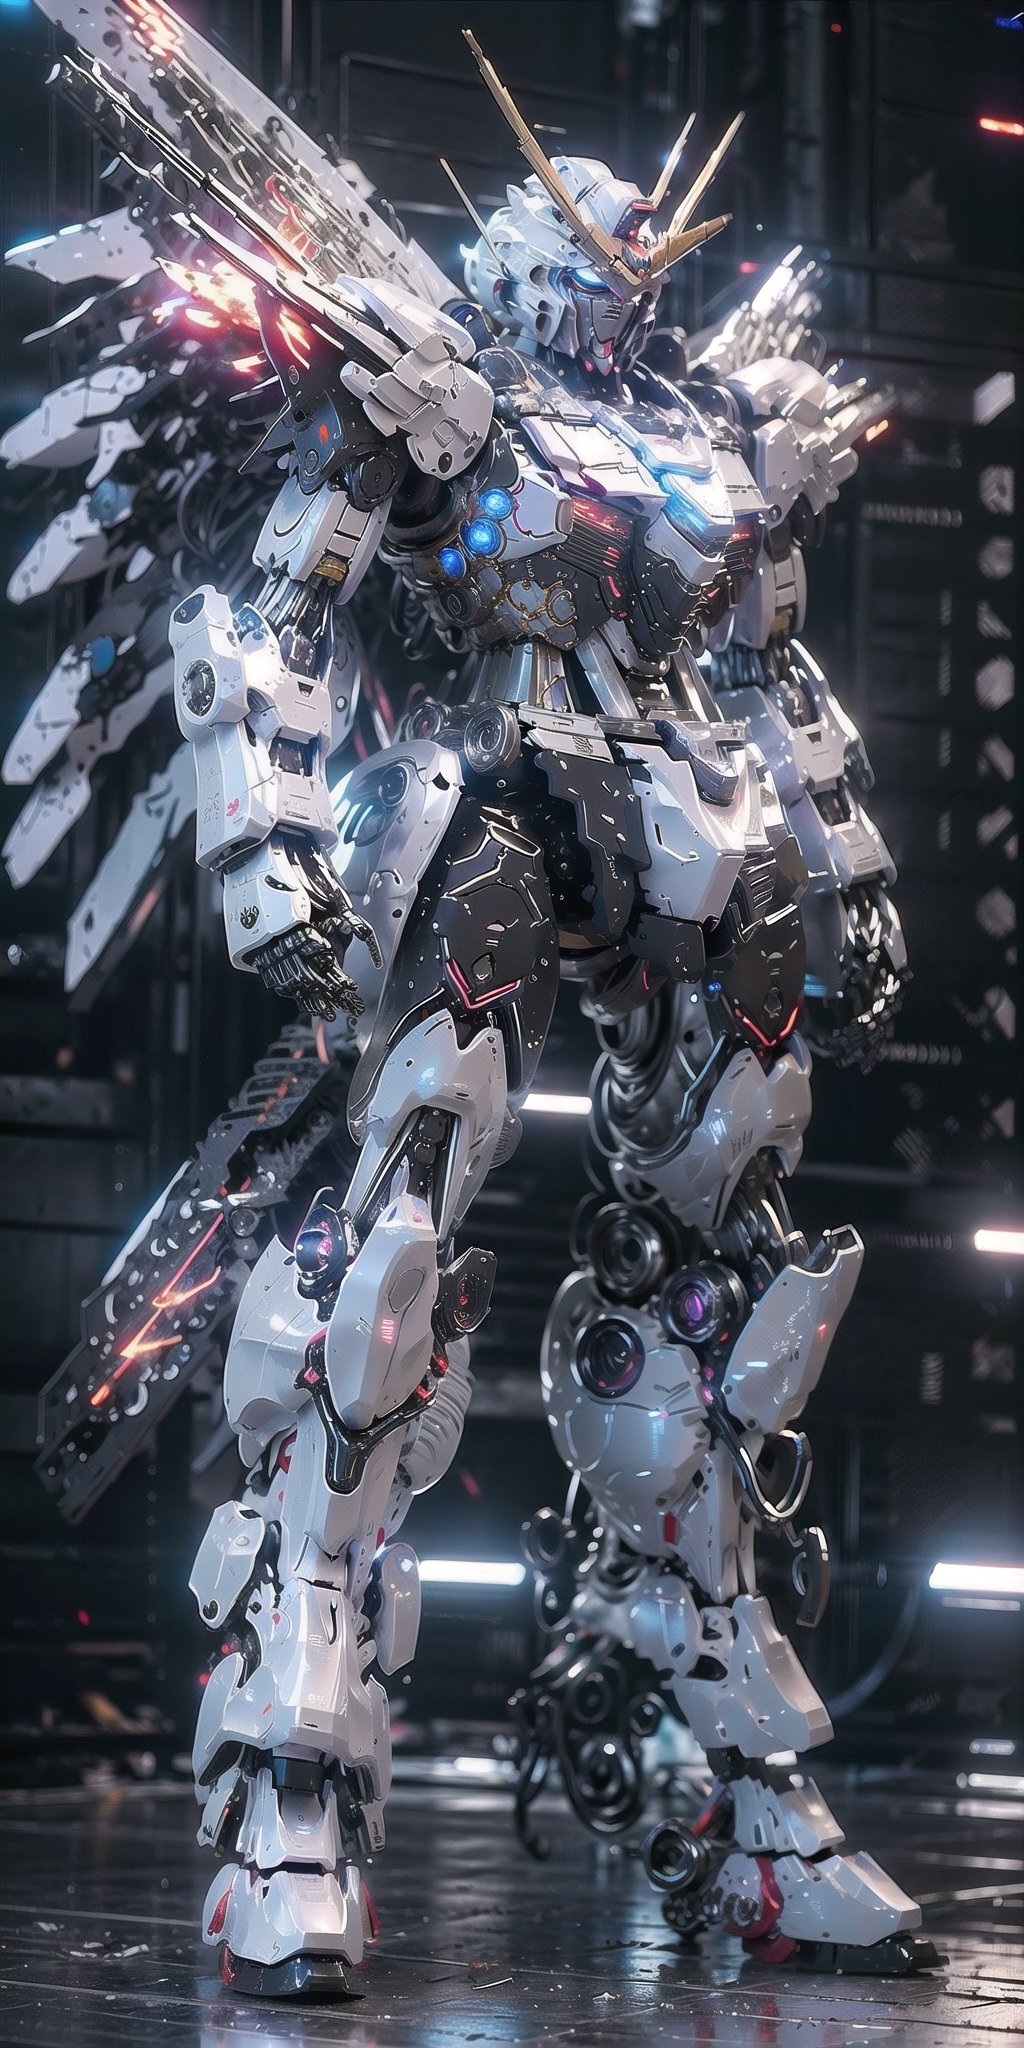 Surrealism neons, Photorealistic, UHD, High Detail, 32k, Best Quality, Textured Skin front walking, red metal Gundam Mecha, wings, Funnel, Mecha Ship, Masterpiece, Best Quality, Mecha, Unmanned, (Full Body), (Black Mecha: 1.8), (Axisymmetric: 1.2), (HDR), (Movie Light: 1.1), White Eyes, Cool, Science Fiction, Fire, Universe, oversized shield, with laser cannon beams, wars, conflicts, machinegun weapons  (has a huge weapon: 1.5),urban techwear,FFIXBG,Realism,Neon Light